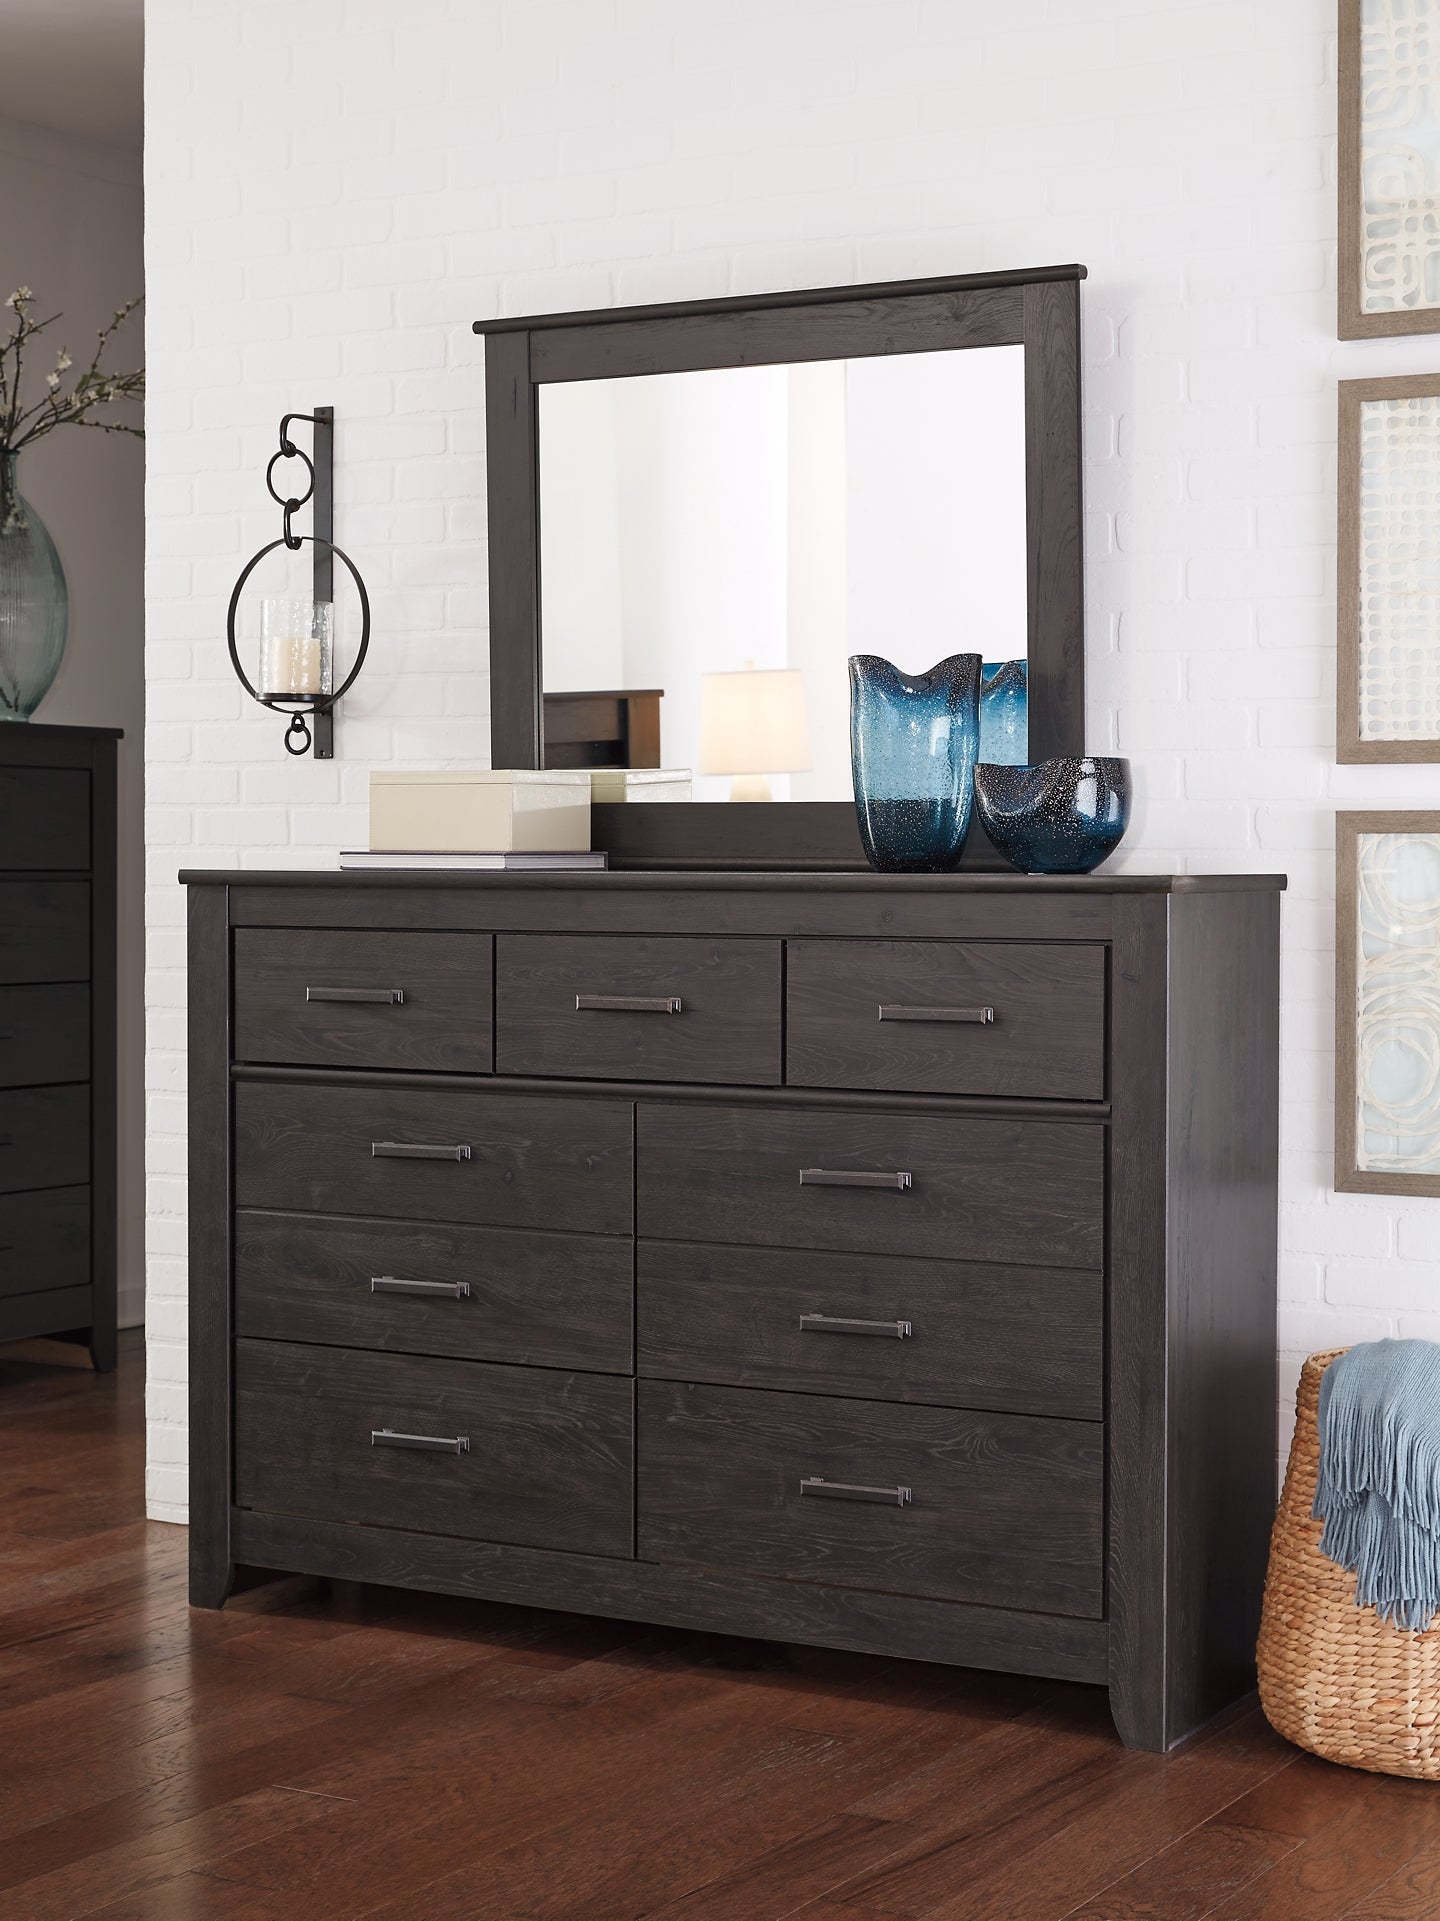 Brinxton Full Panel Bed with Mirrored Dresser, Chest and Nightstand Cloud 9 Mattress & Furniture